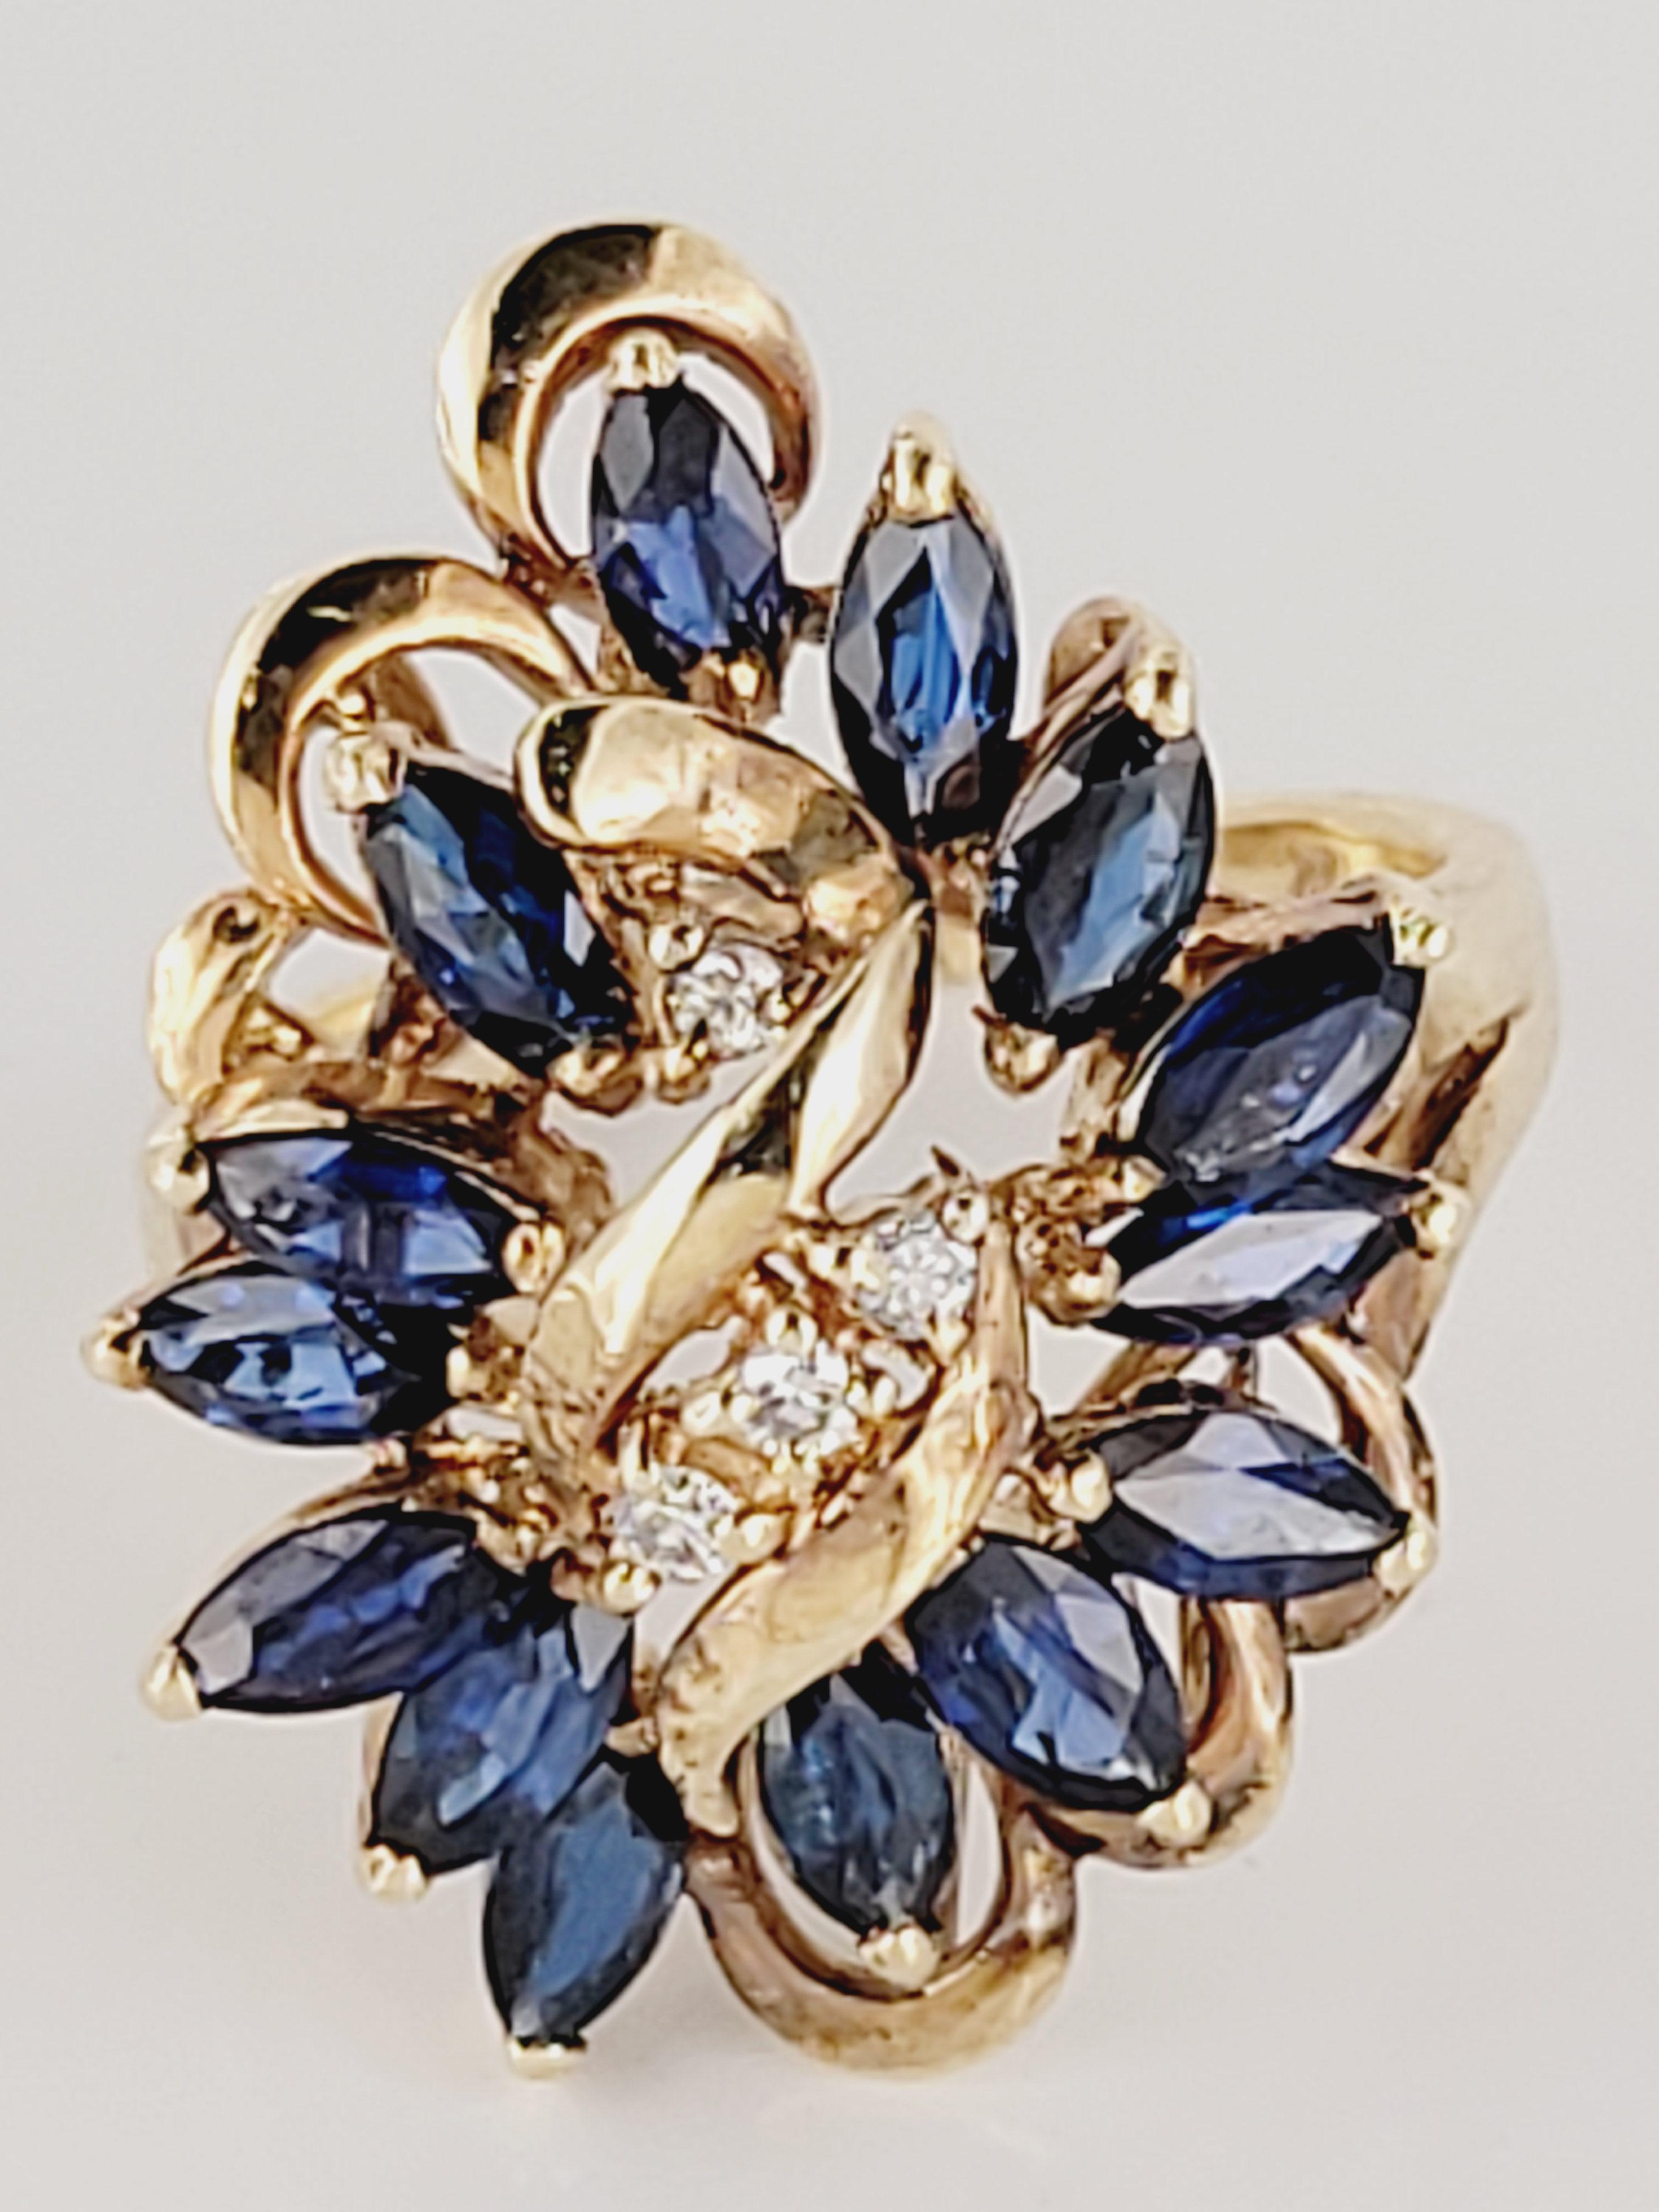 Natural Blue Sapphire 1.65 carats. Marquise cut Blue Sapphire. White Diamond 0.08ct. Set in 14K Yellow Gold. Size 6.75.